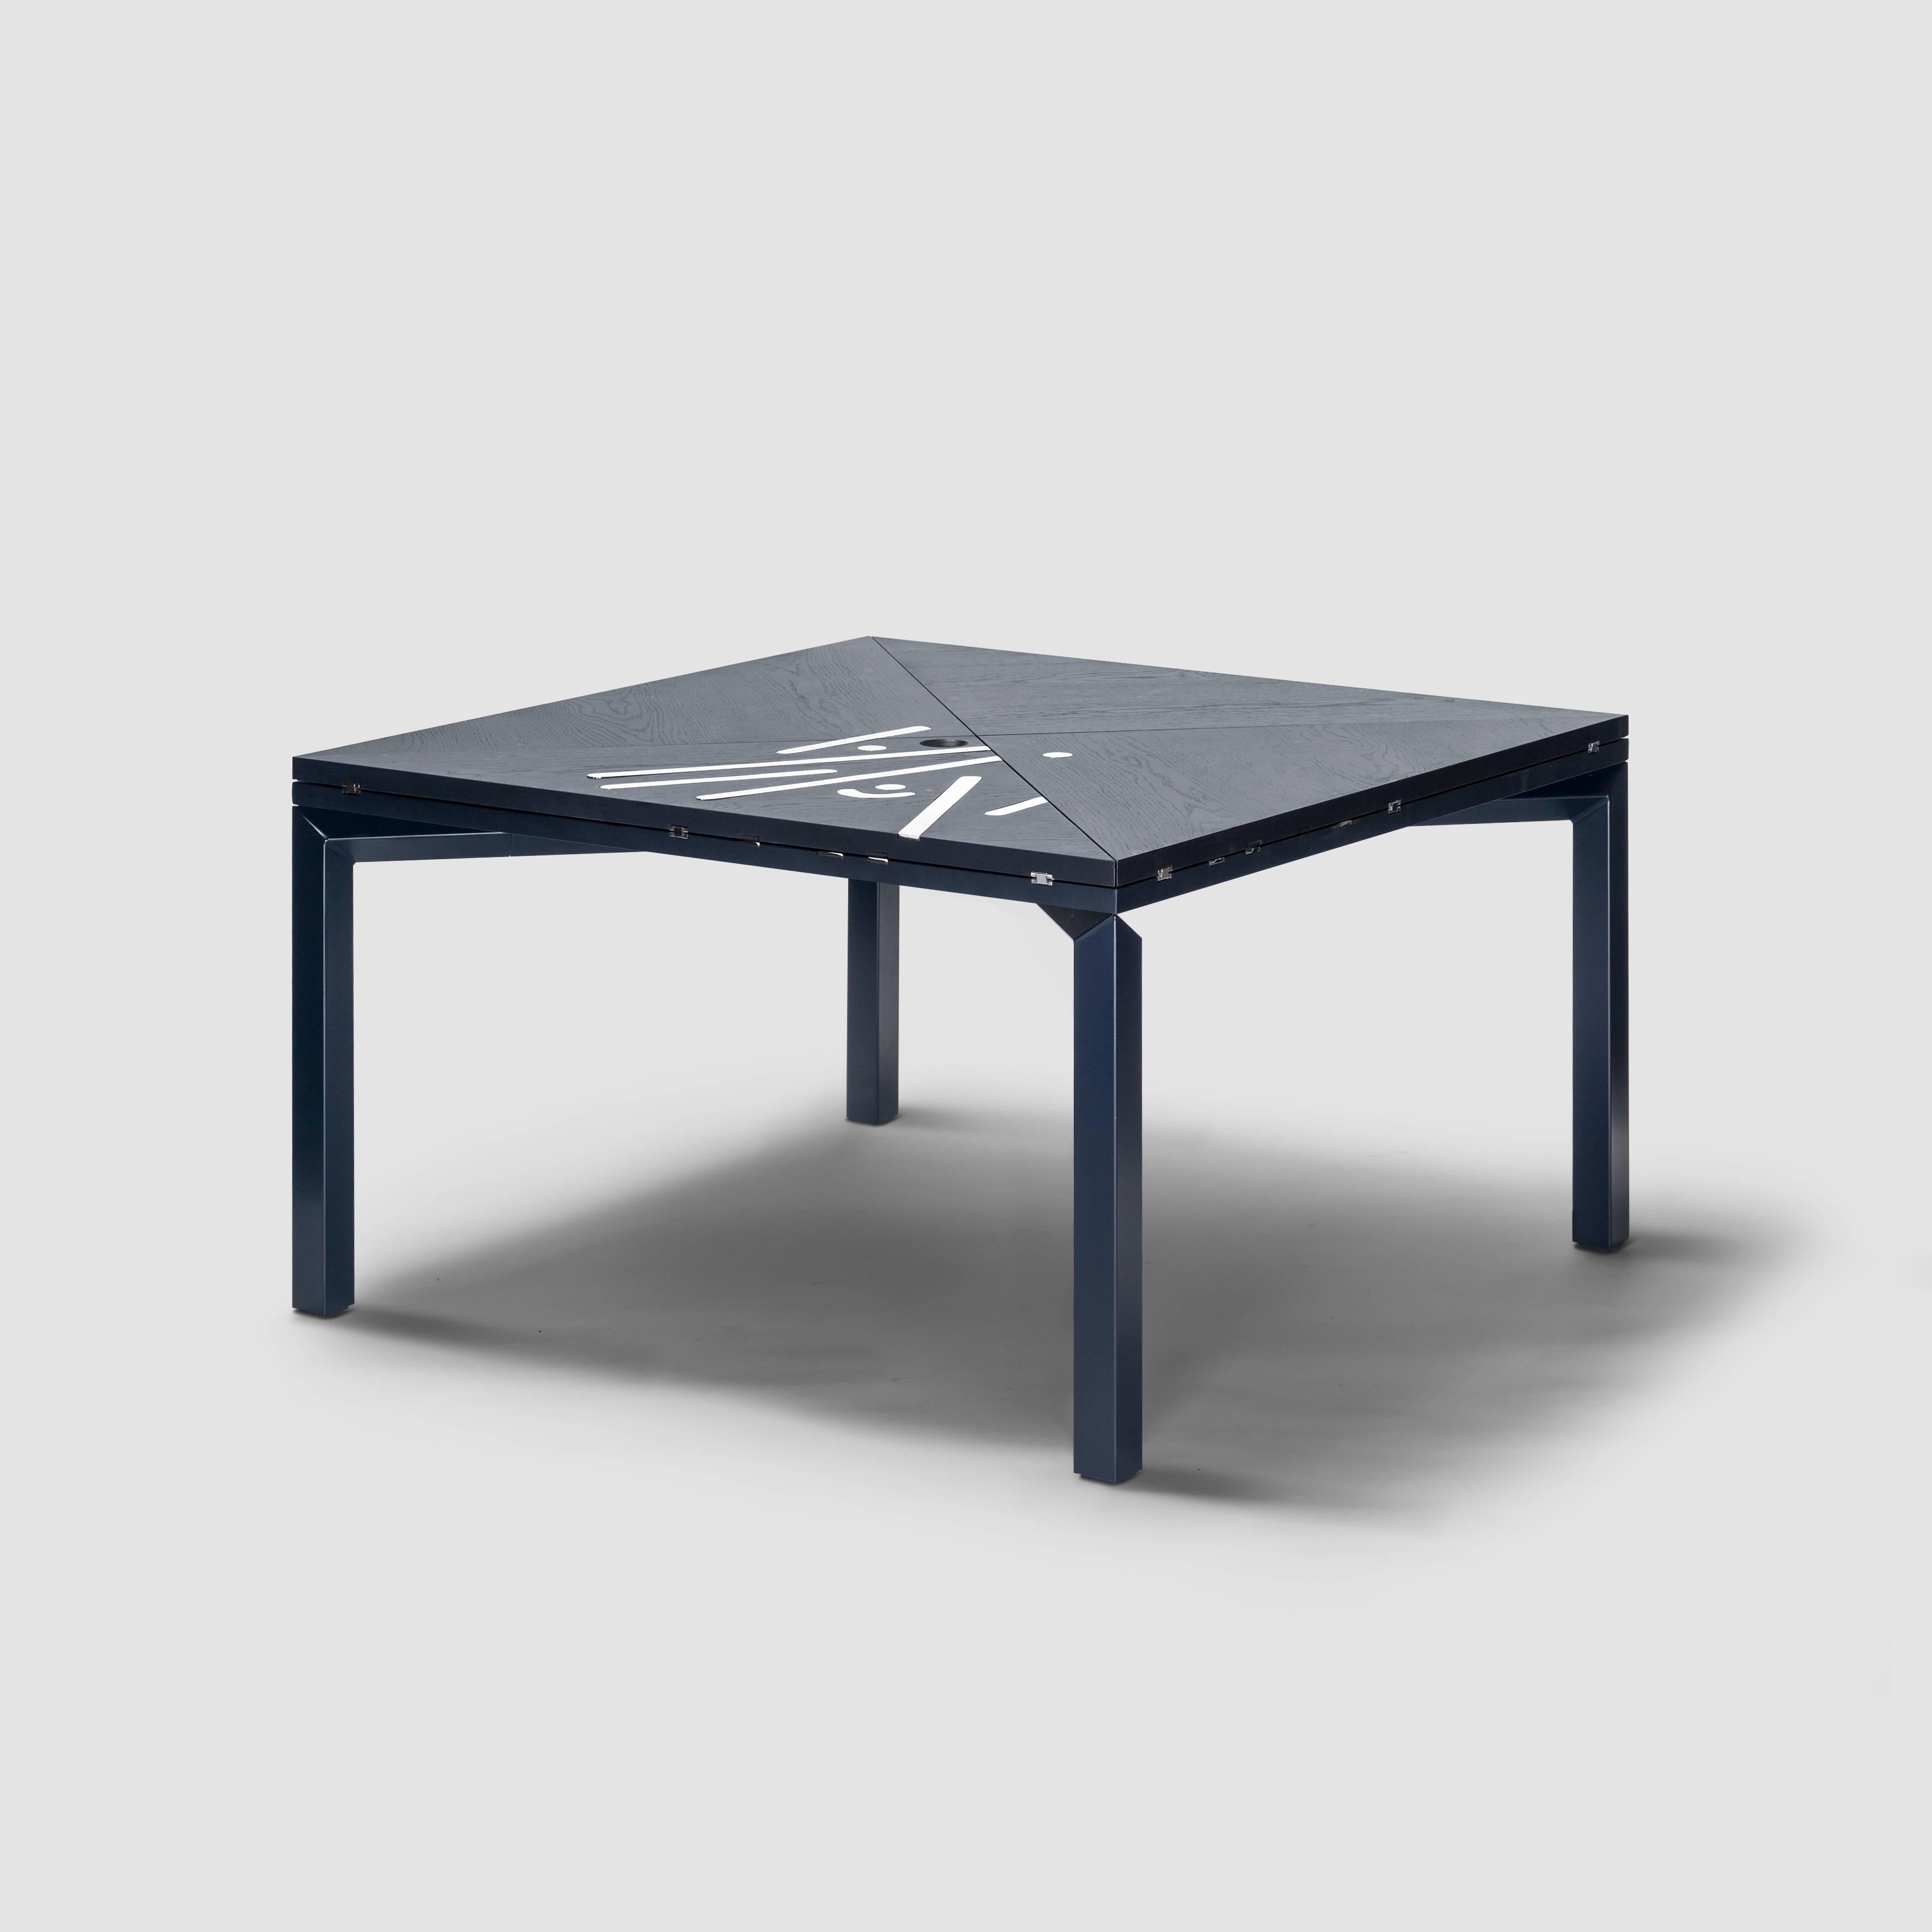 Contemporary Limited Edition Alella Table by Lluís Clotet